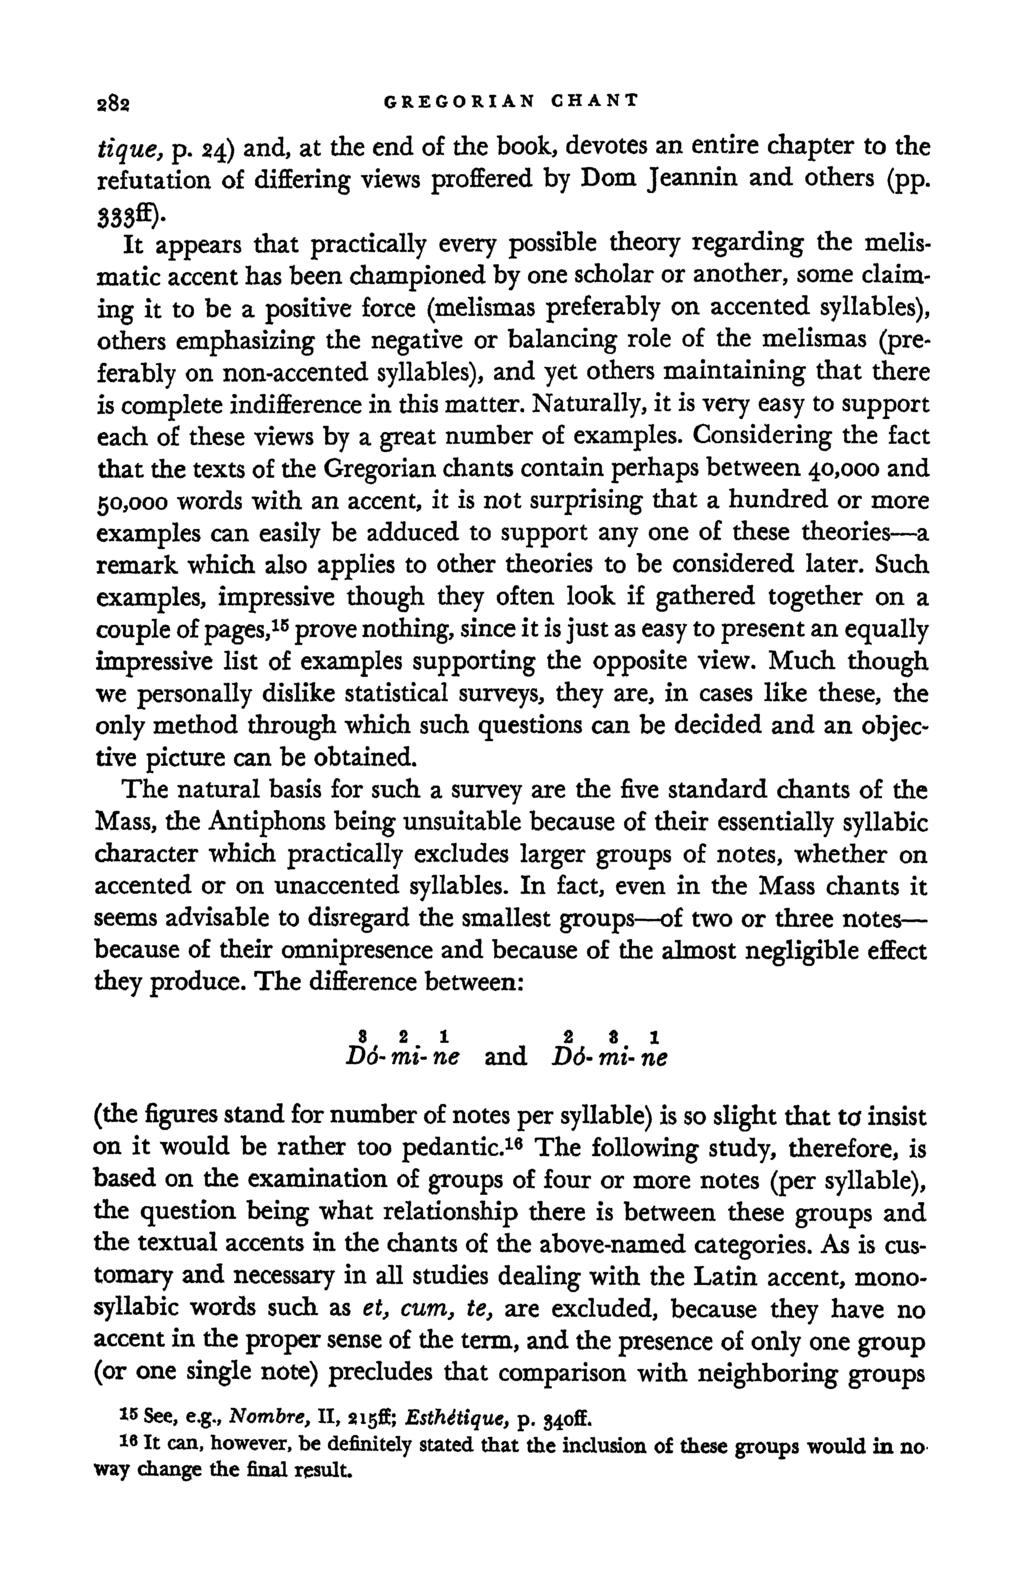 GREGORIAN CHANT tique, p. 24) and, at the end of the book, devotes an entire chapter to the refutation of differing views proffered by Dom Jeannin and others (pp.